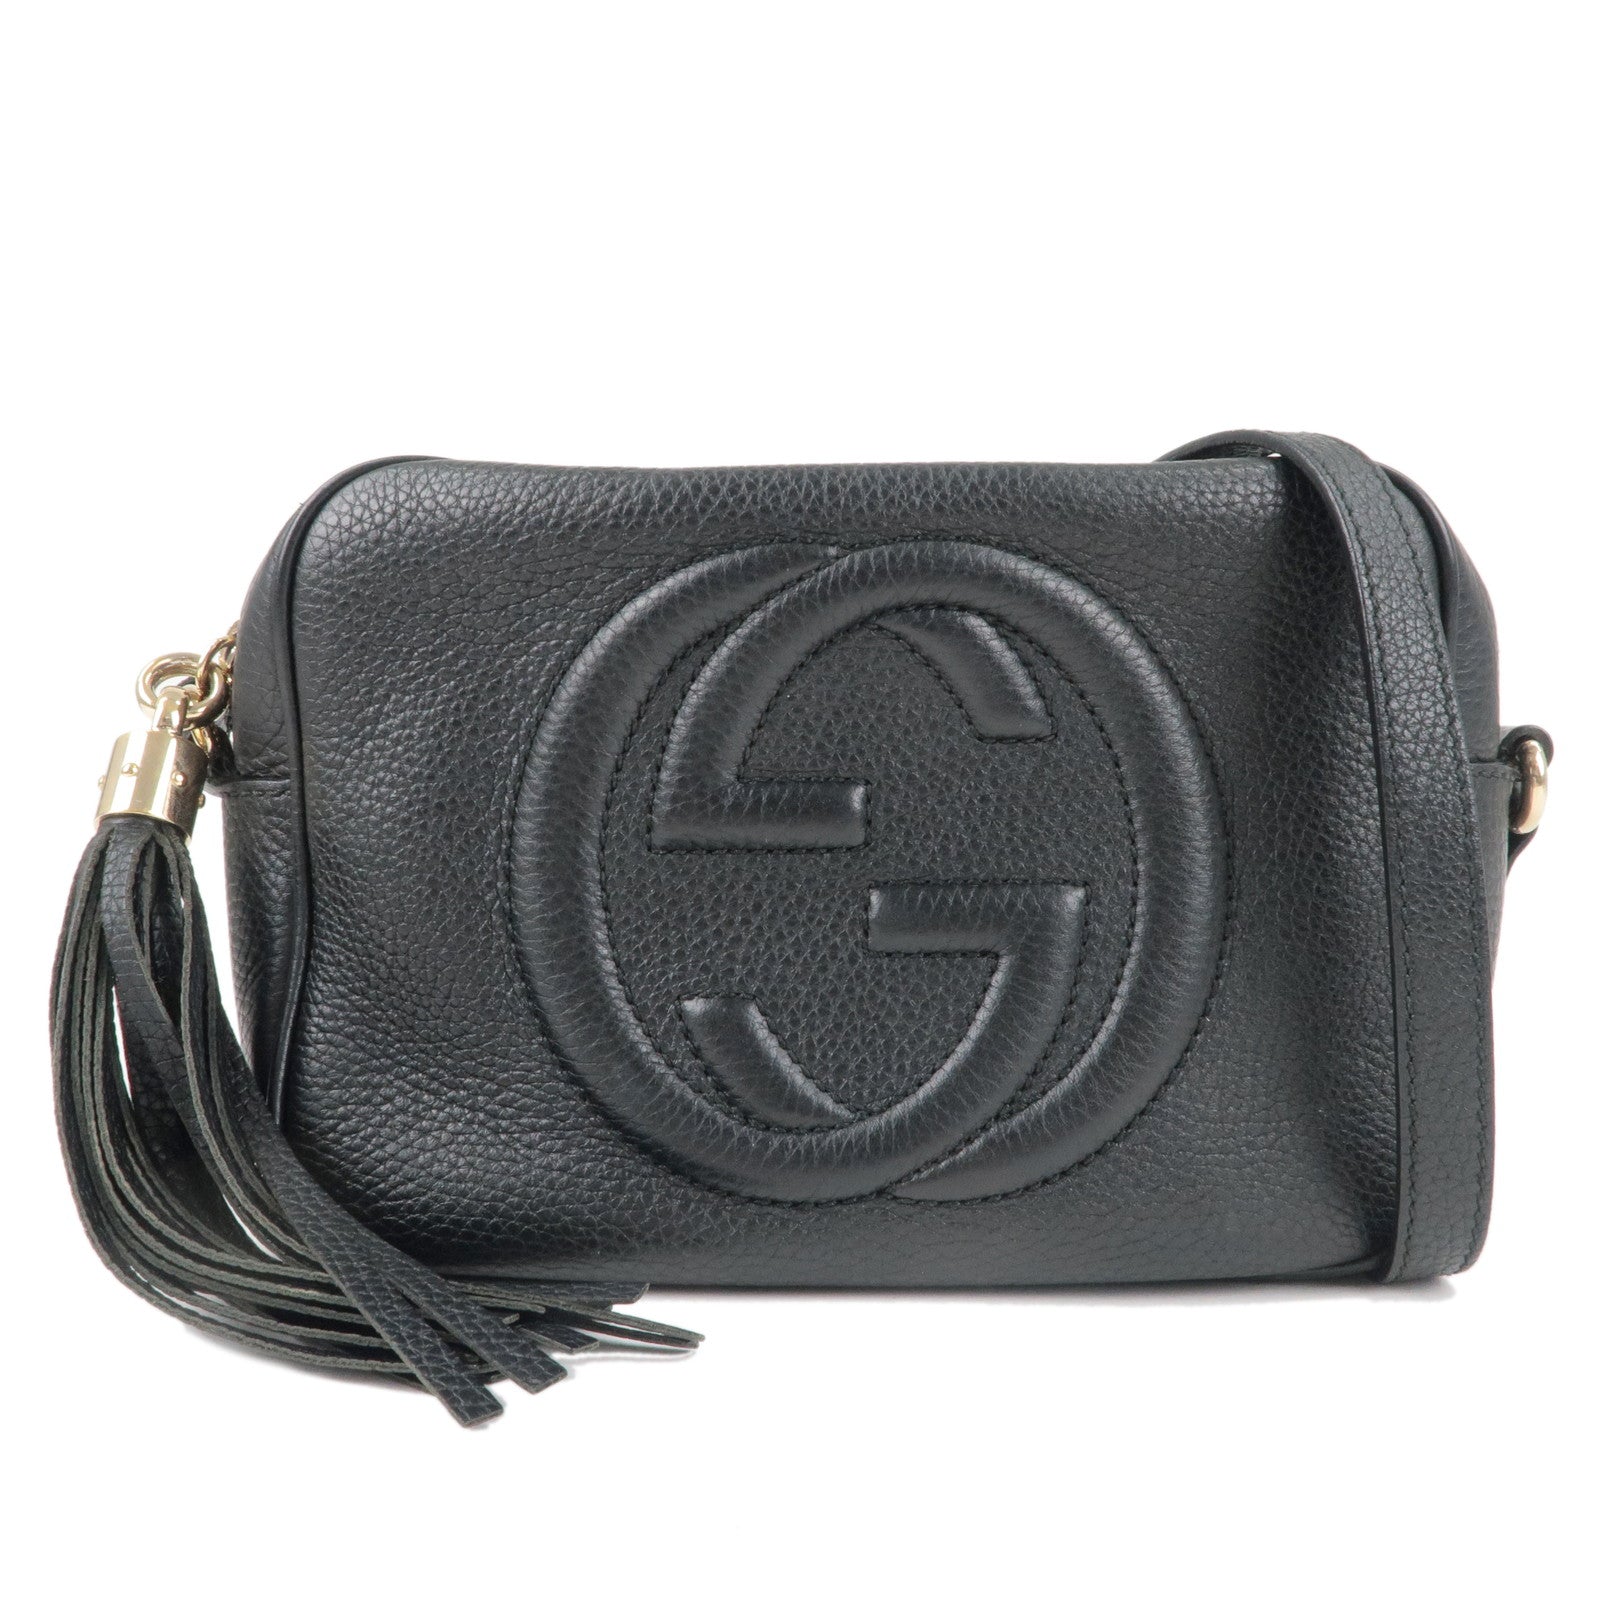 GUCCI-SOHO-Small-Disco-Leather-Shoulder-Bag-Black-308364 – dct